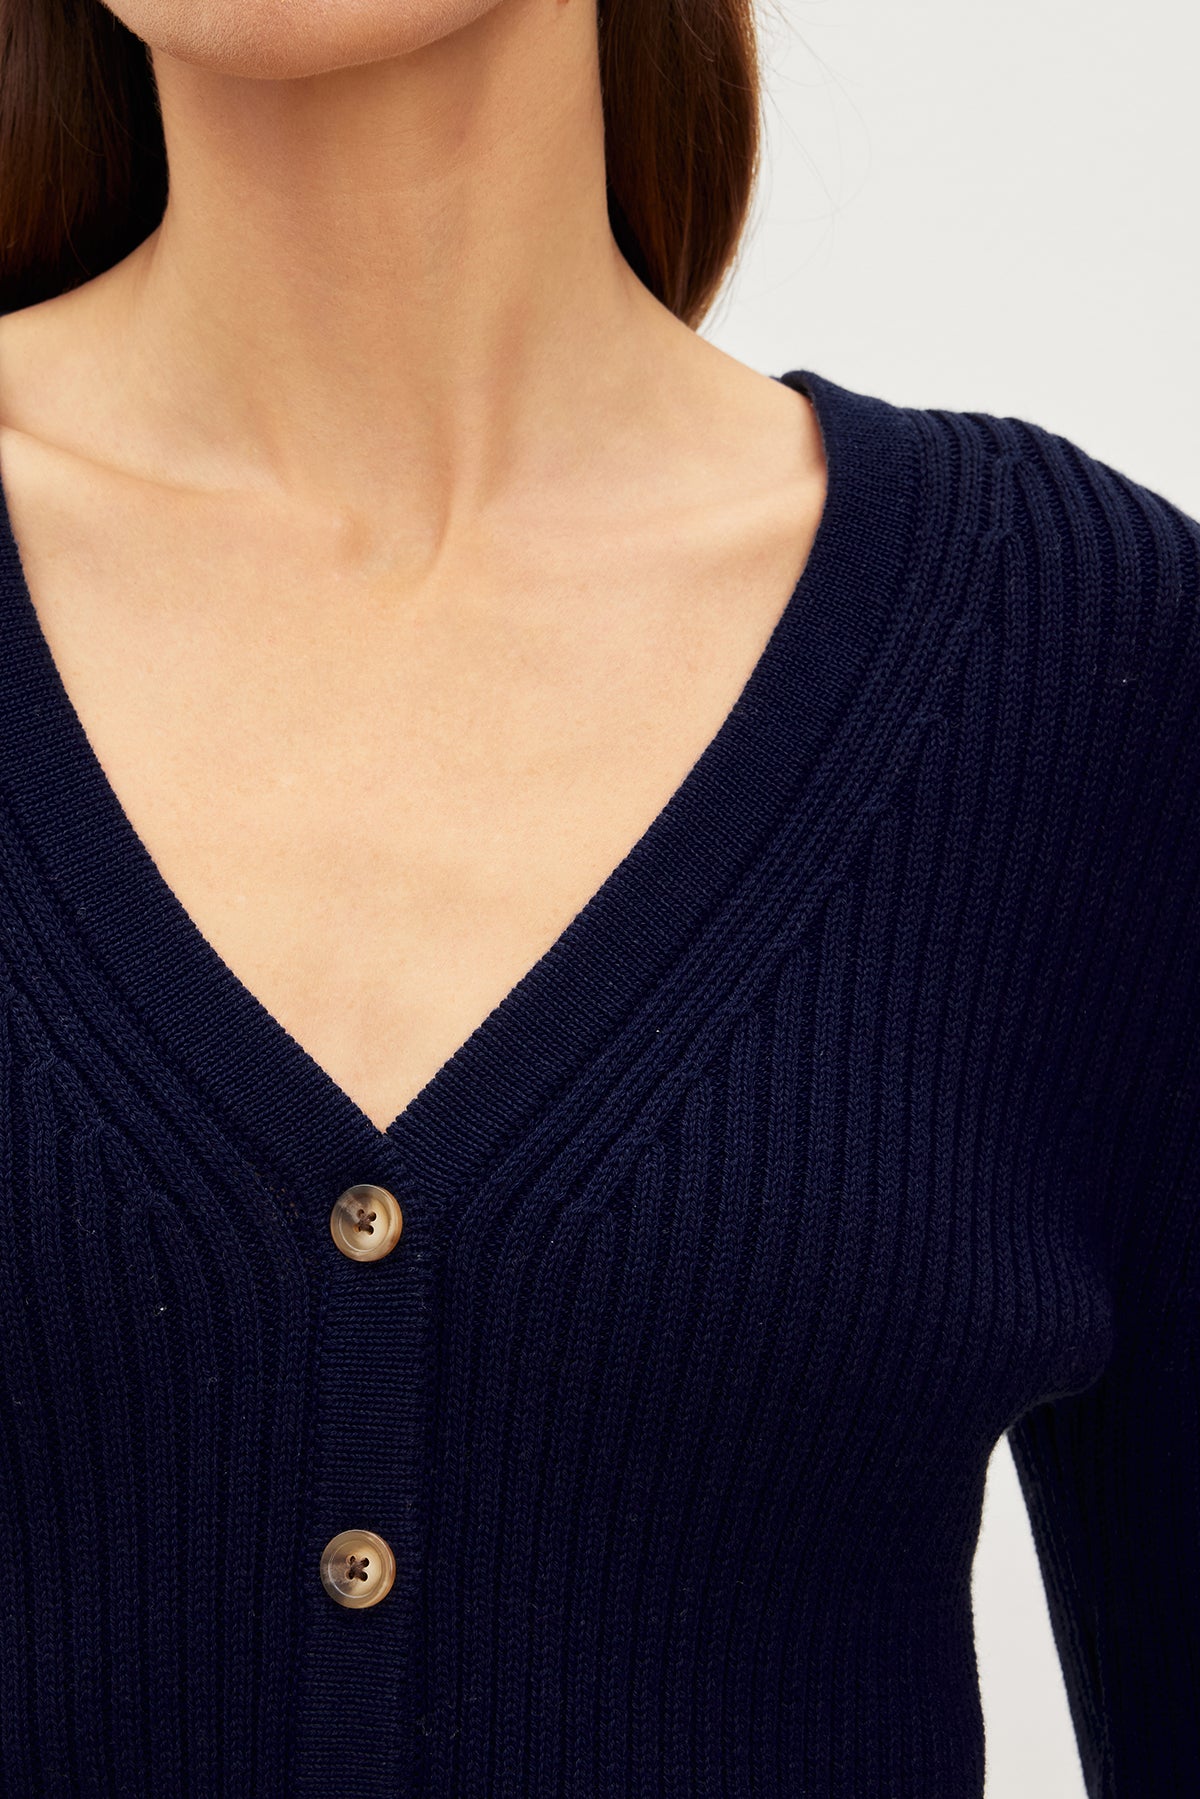   The model is wearing a versatile choice of a Navy HYDIE BUTTON FRONT CARDIGAN by Velvet by Graham & Spencer. 